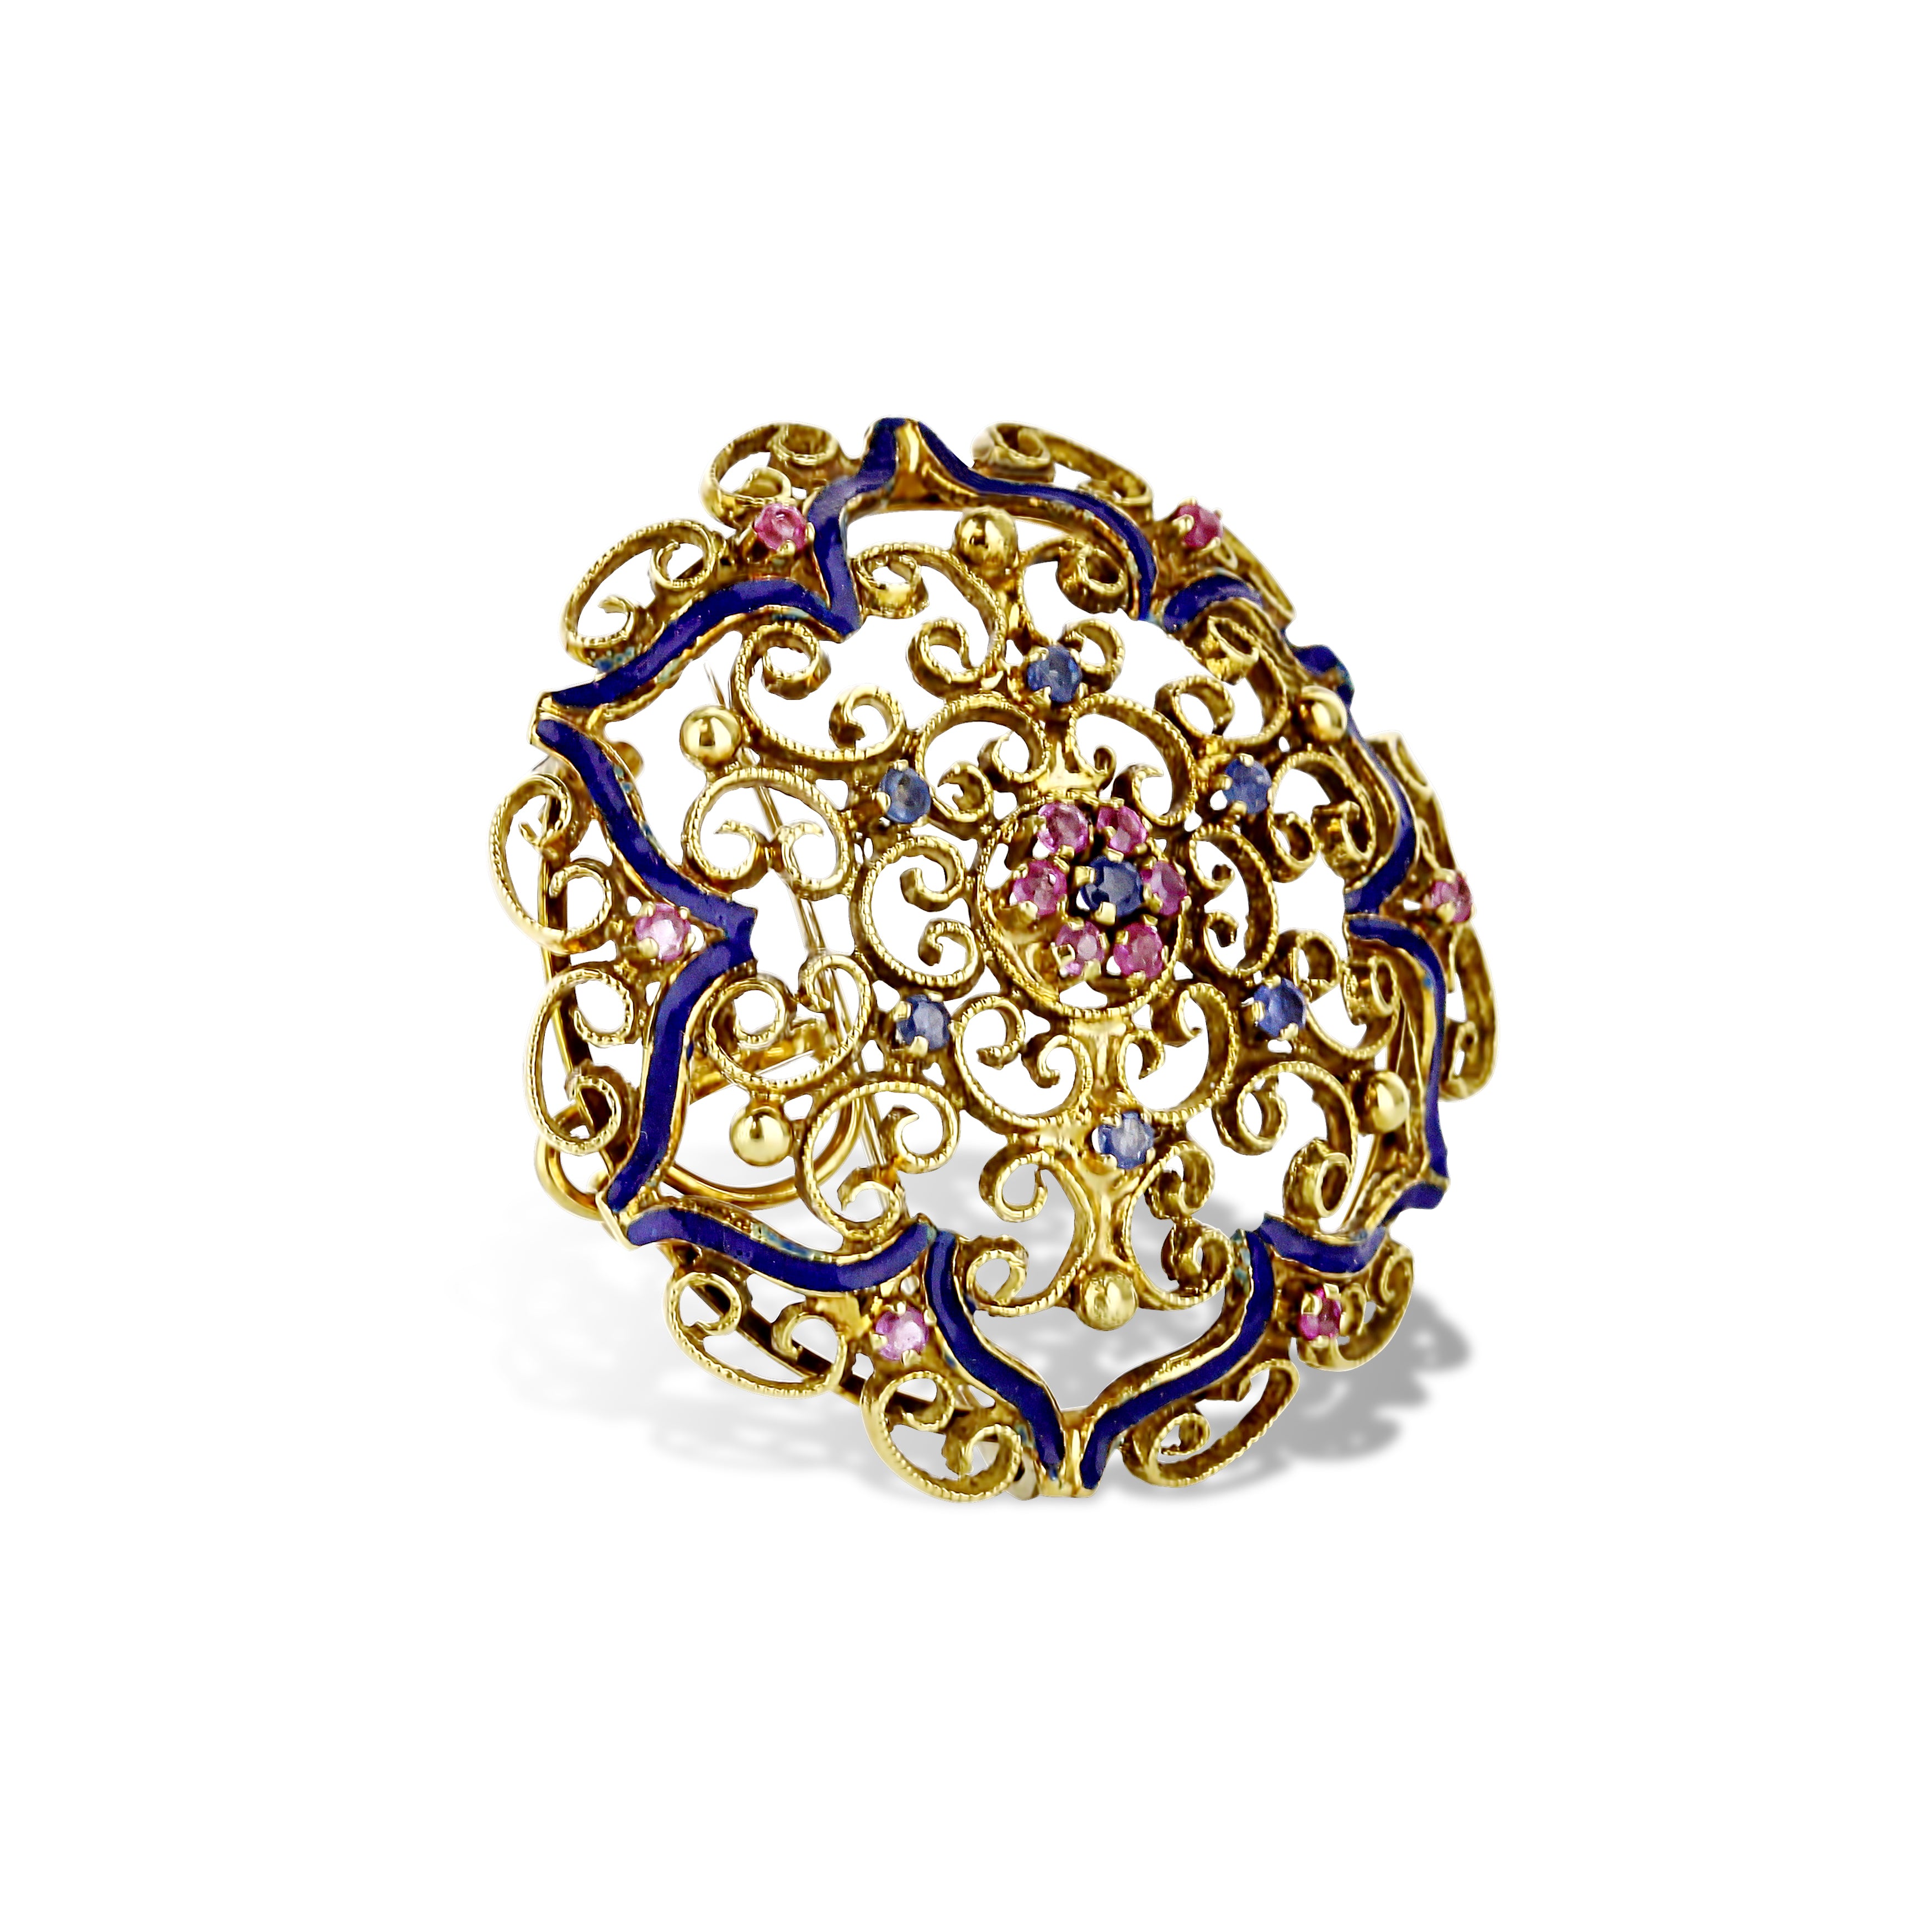 18K Yellow Gold Victorian Hand-Made Pink And Blue Stone Brooch